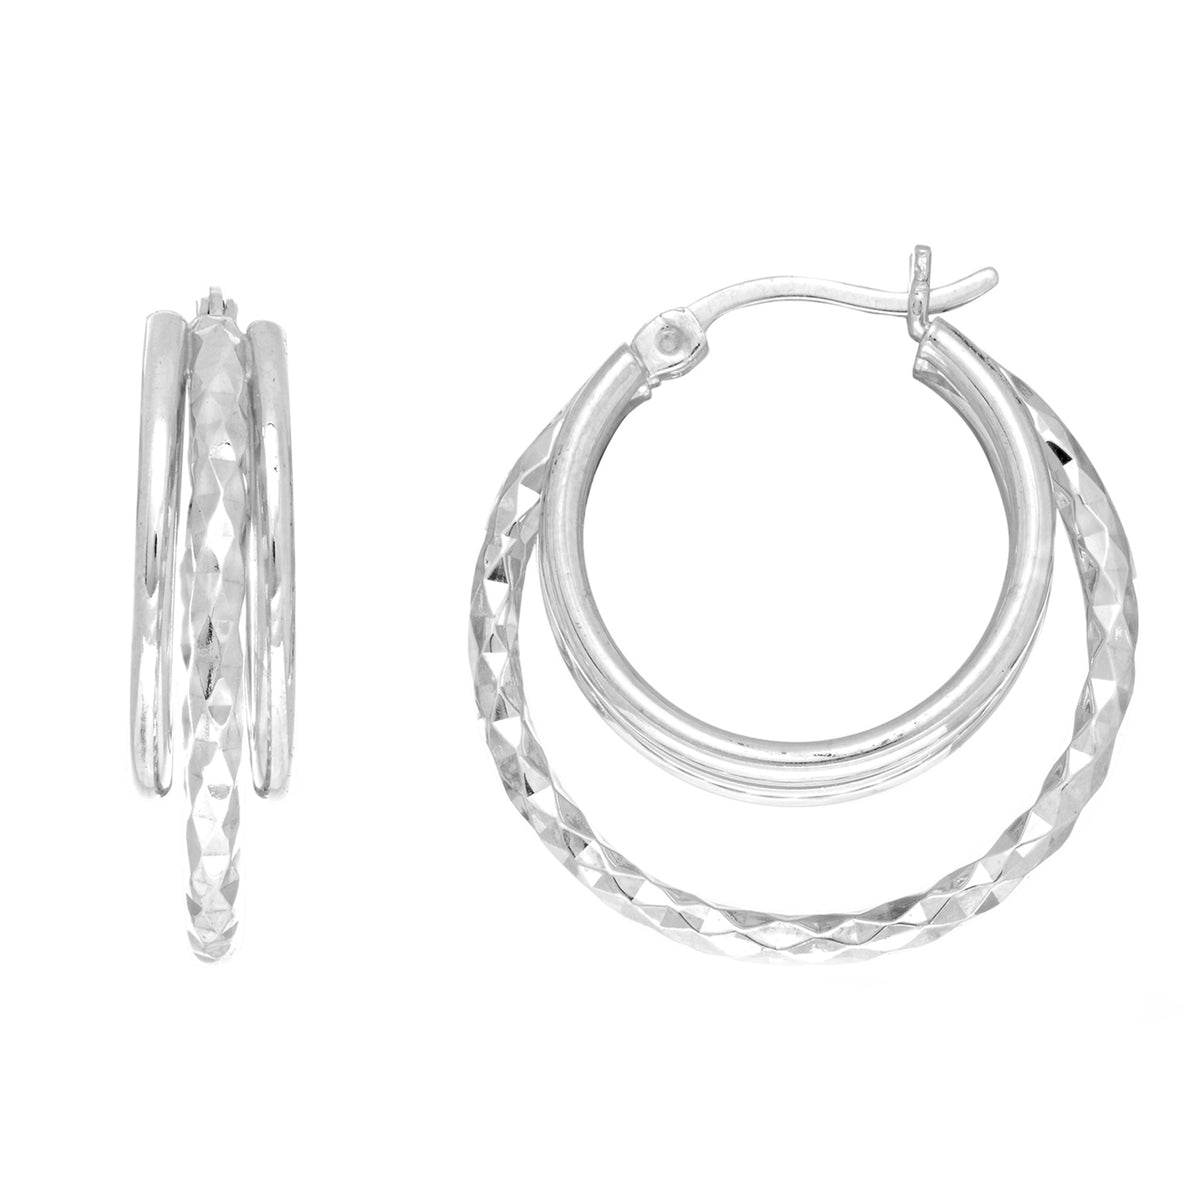 Sterling Silver Rhodium Plated Double Open Circle Round Hoop Earrings, Diameter 25mm fine designer jewelry for men and women